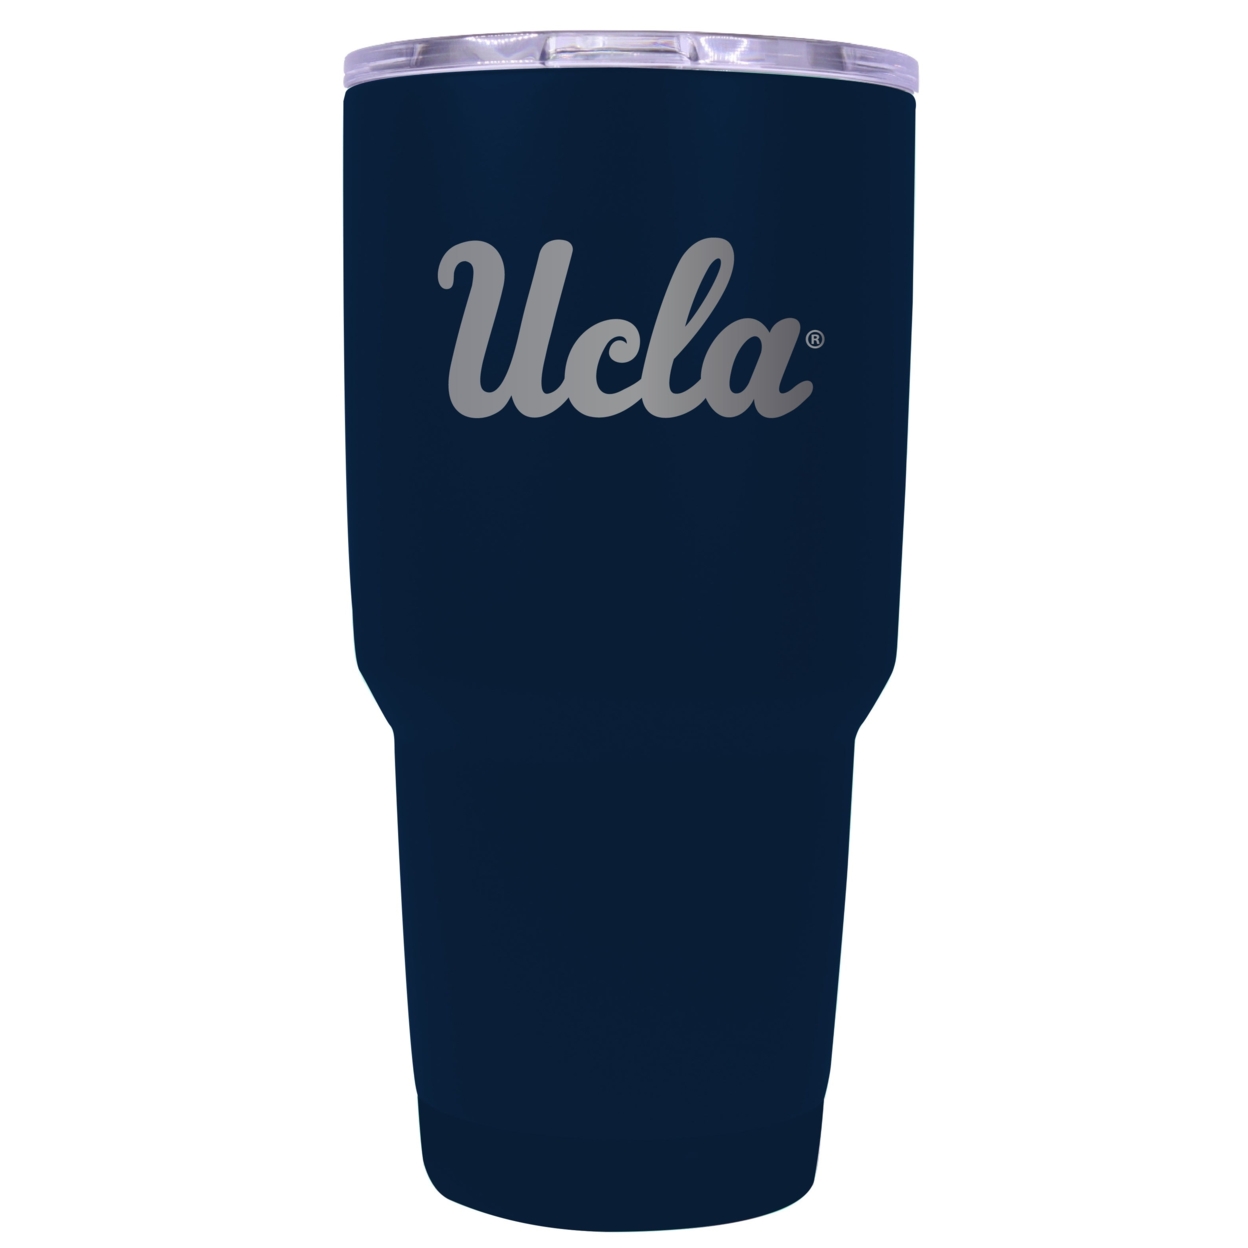 UCLA Bruins 24 Oz Laser Engraved Stainless Steel Insulated Tumbler - Choose Your Color. - Navy